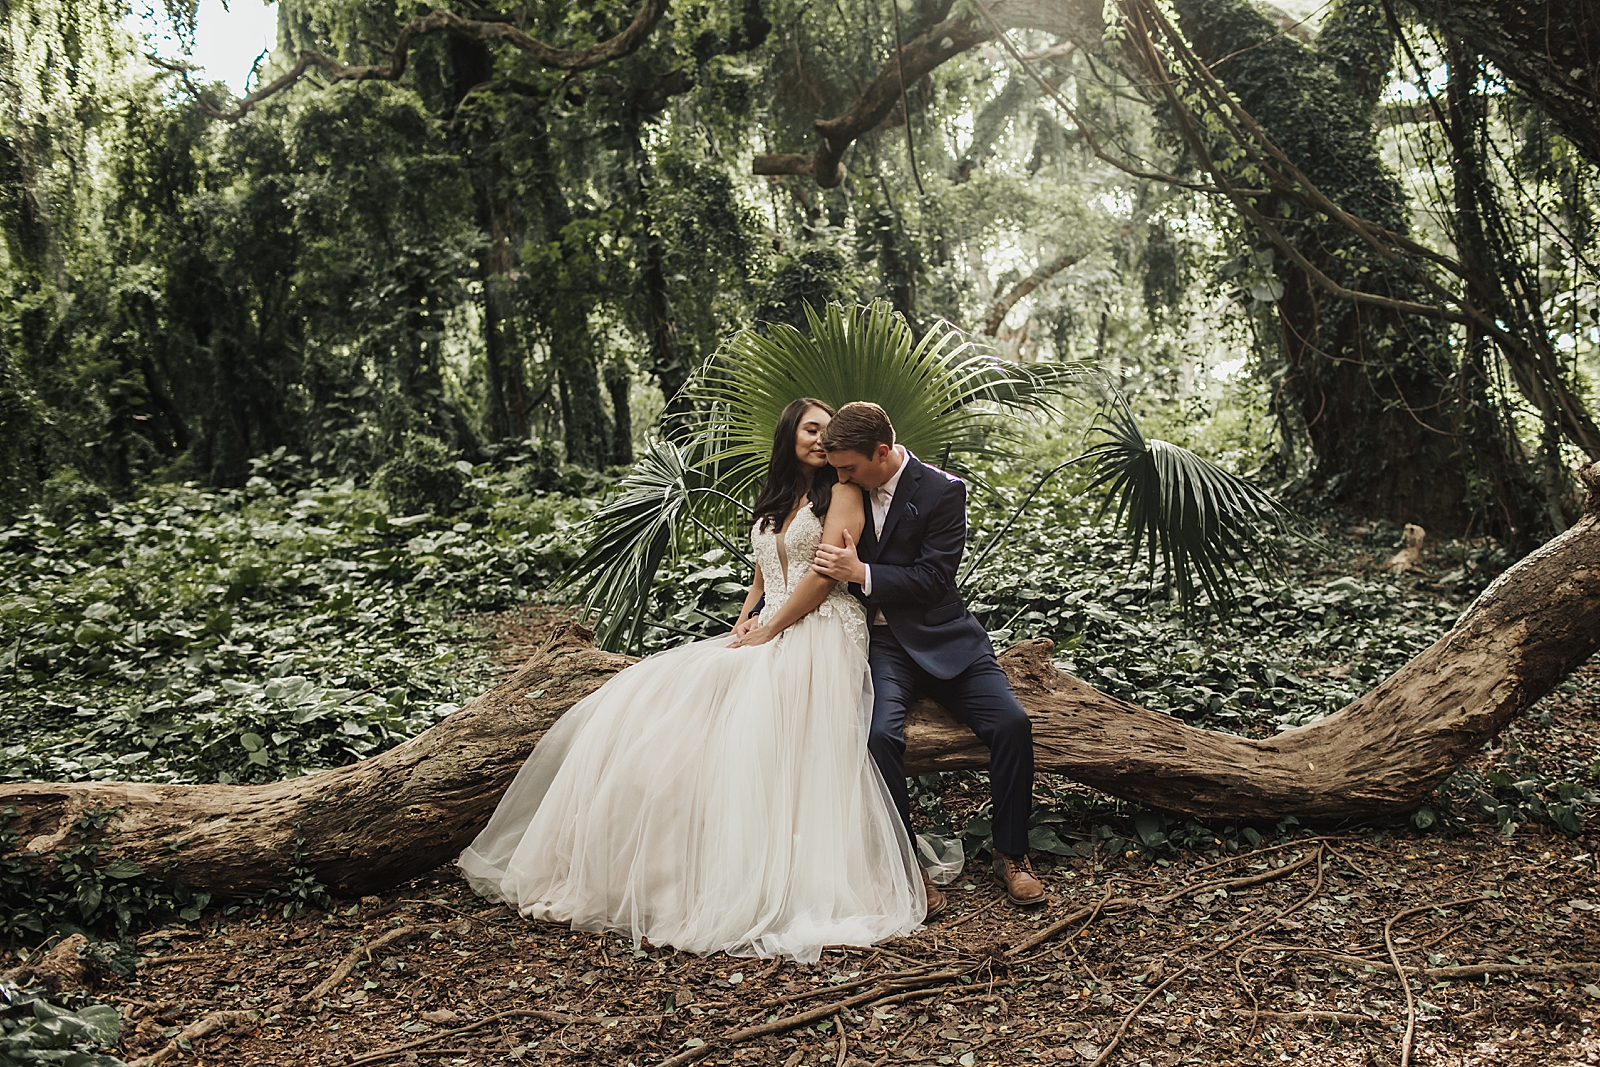 Bride and Groom sitting on fallen tree trunk and nuzzling close together